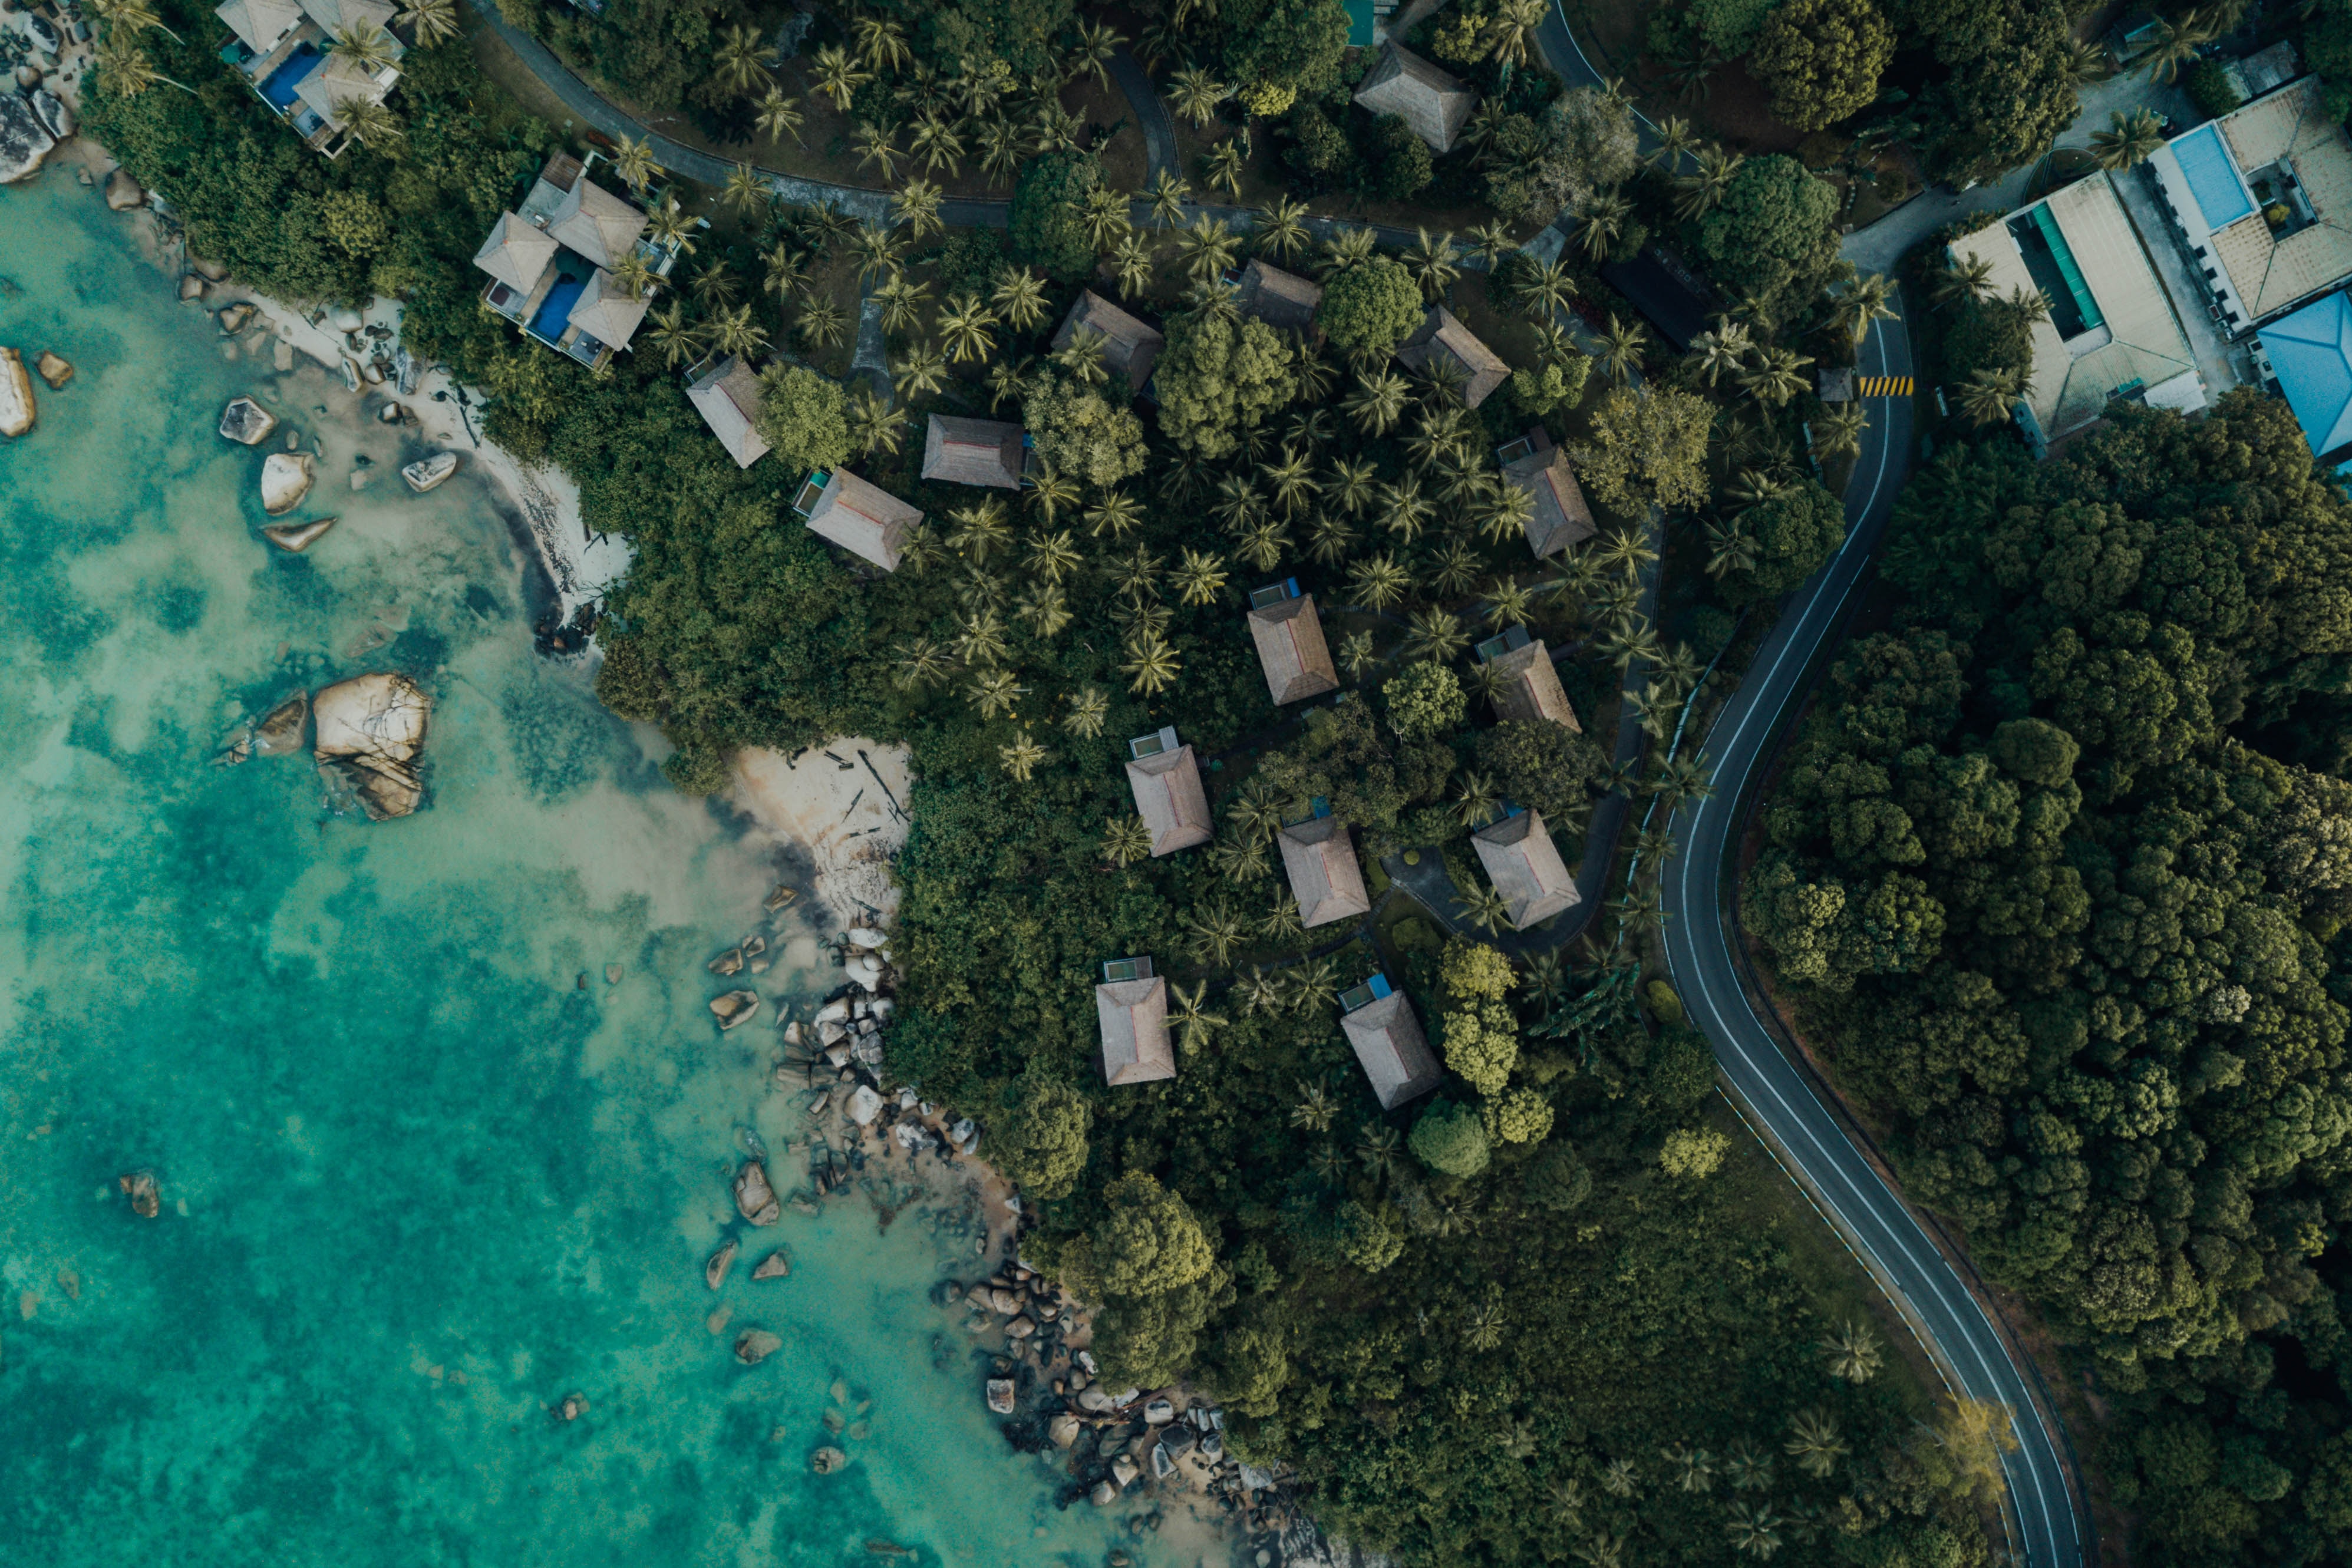 view from above, nature, trees, sea, building, shore, bank 2160p